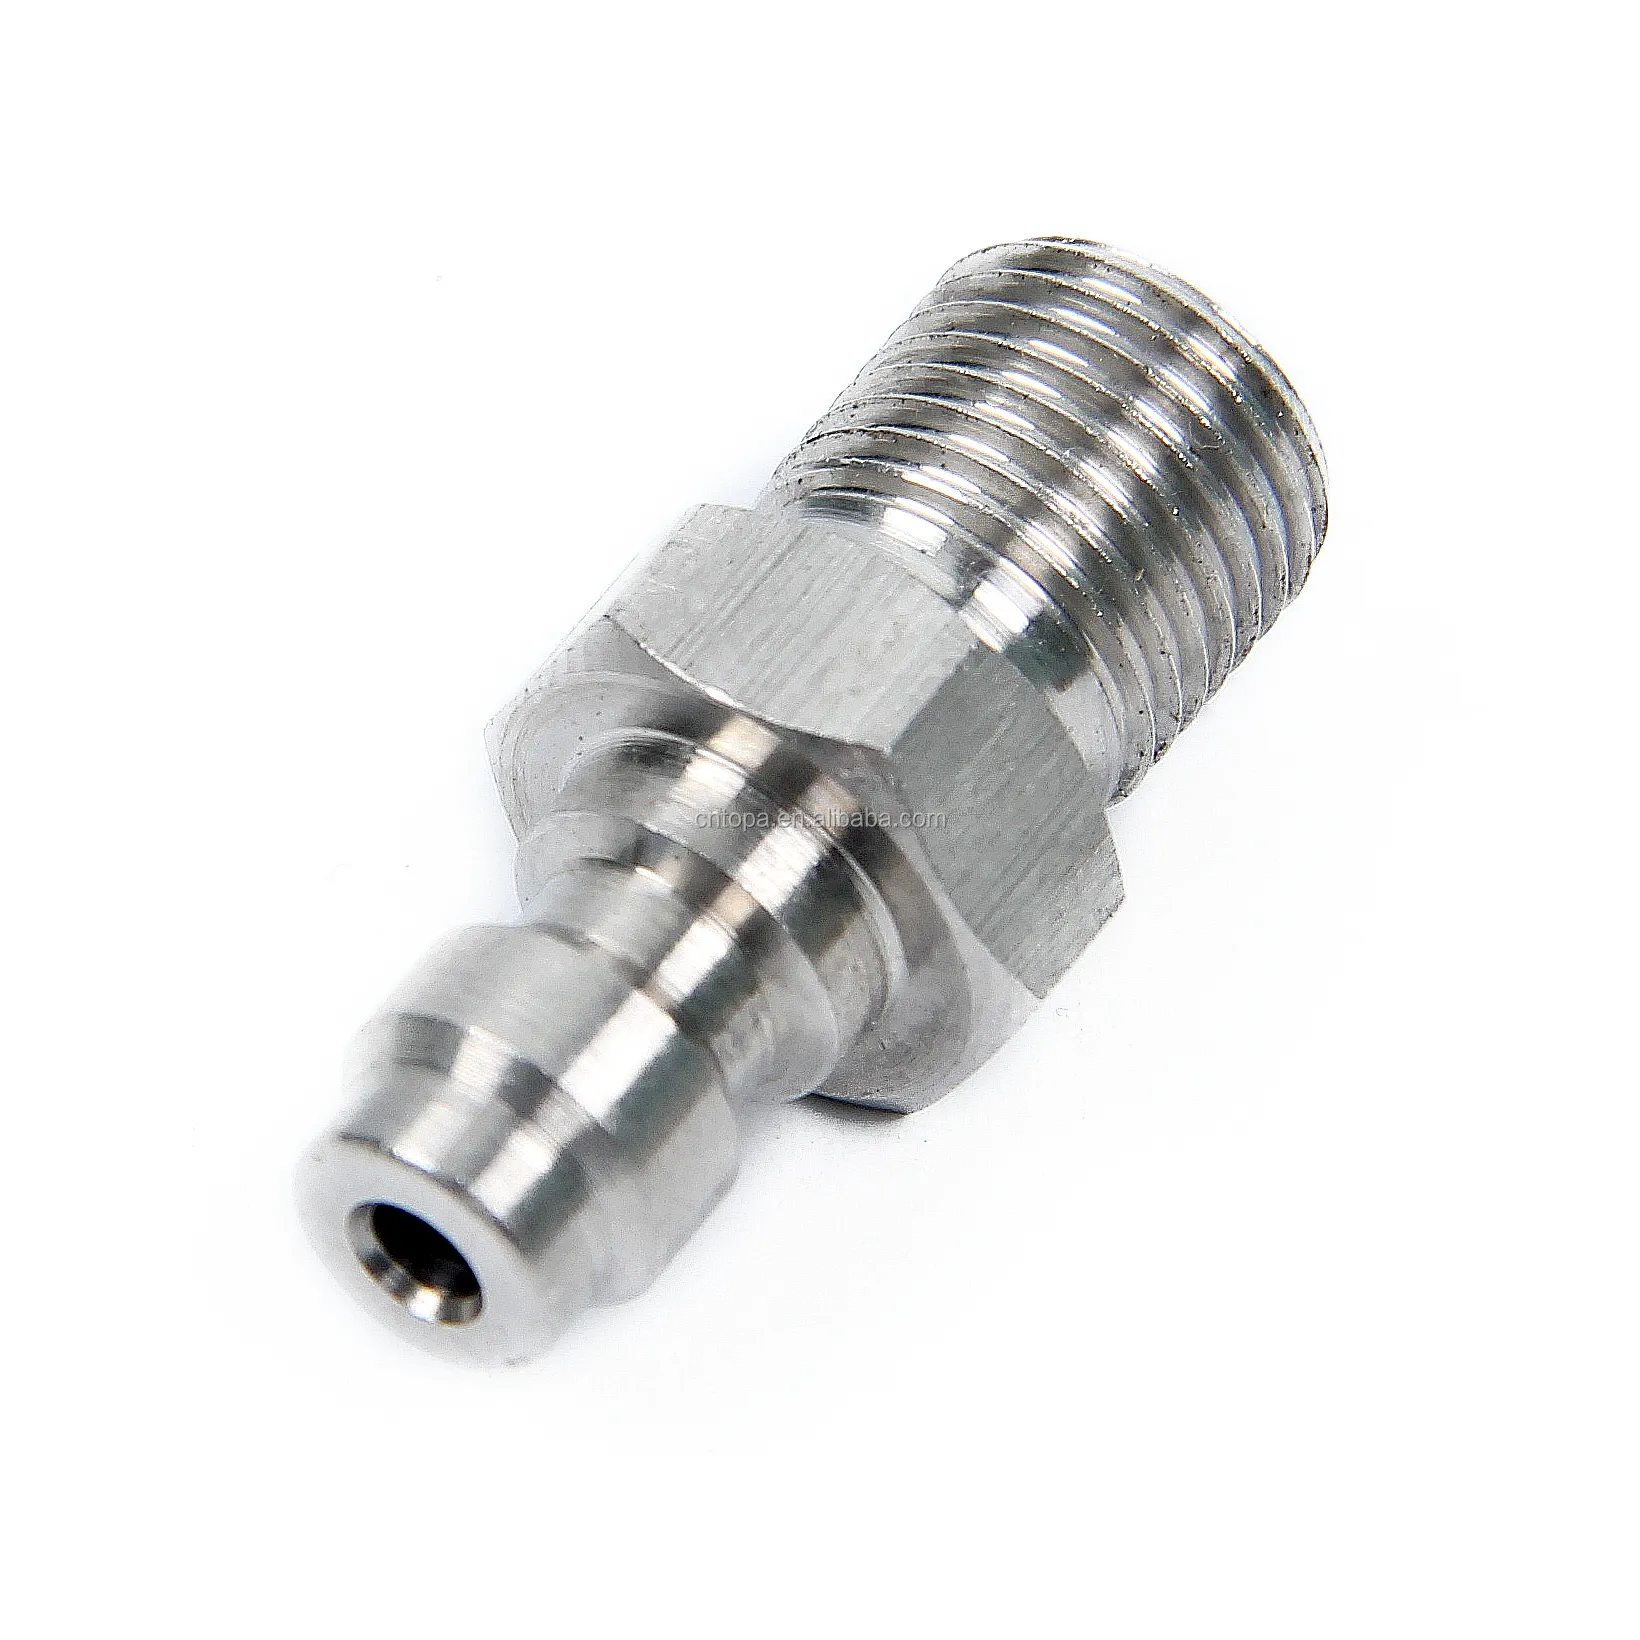 1/8 NPT Connector Fittings PCP Paintball M10 Fremale Plug Quick Disconnect 